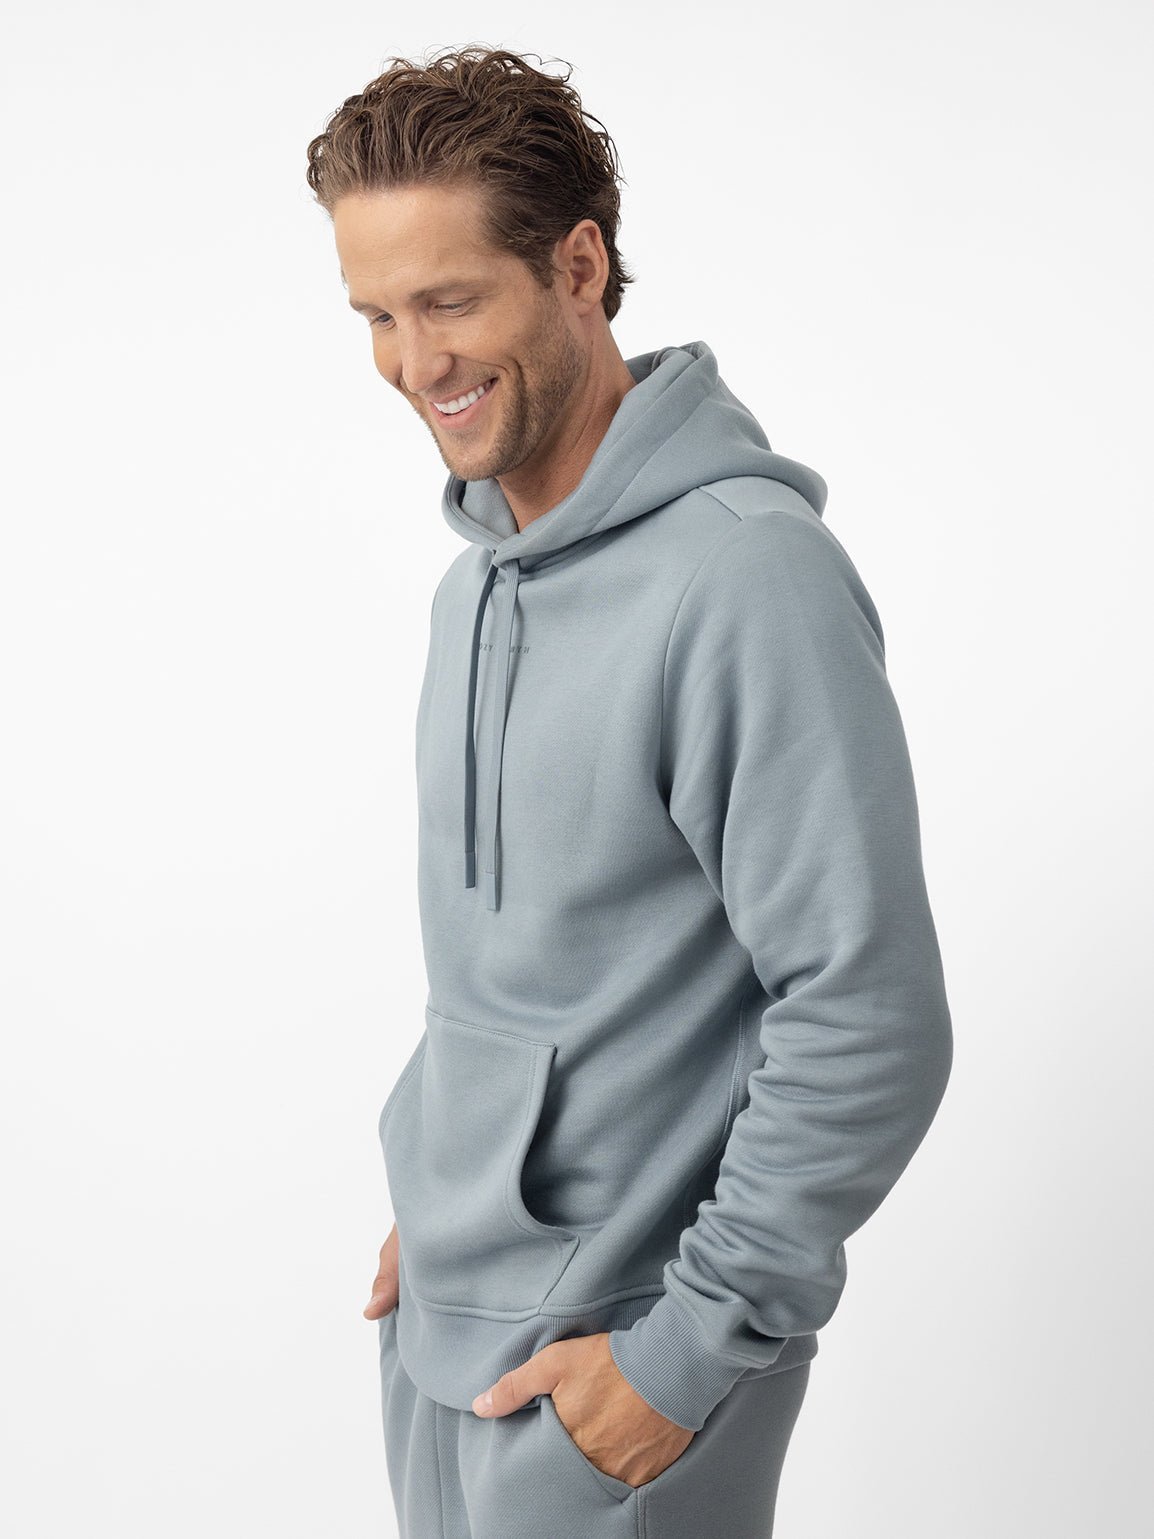 Man smiling wearing smokey blue cityscape hoodie with white background 